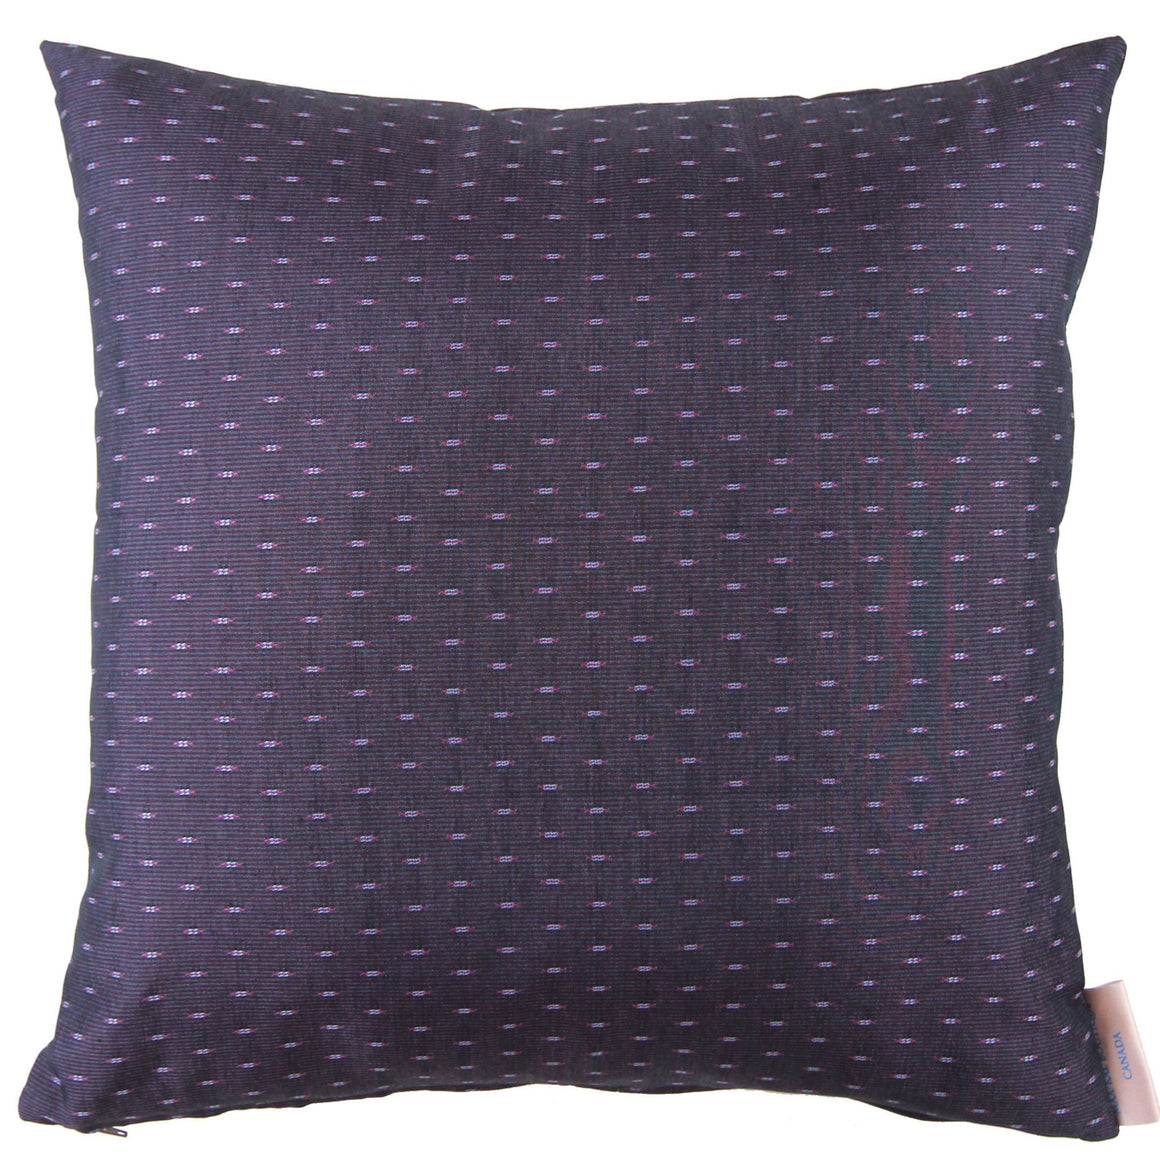 Vivian - Purple with Pink Embroidered dots - 18x18 - 20x20 - Maa-Kal Boutique Canada